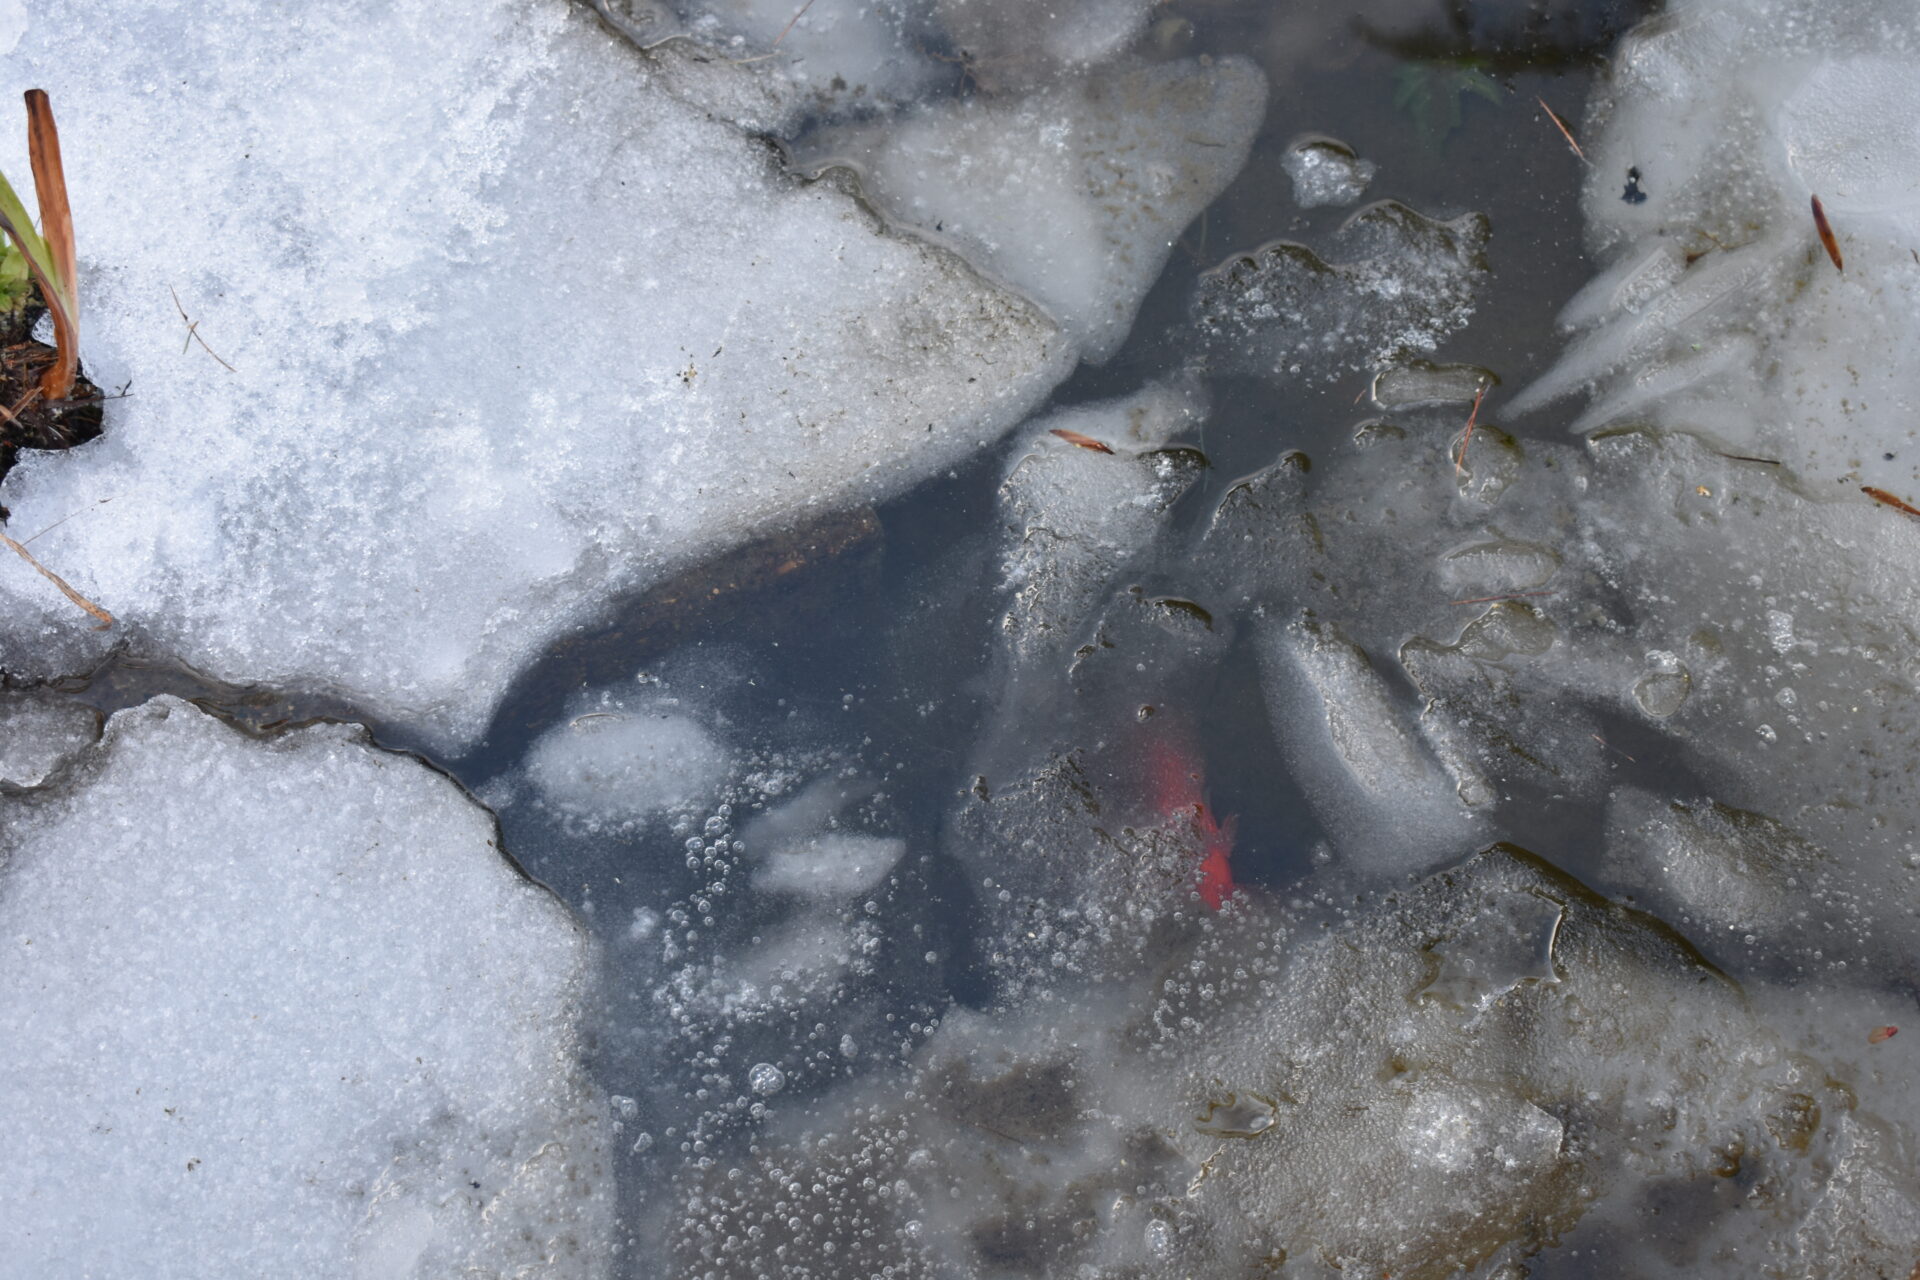 A single orange goldfish can be seen underneath a frozen pond.